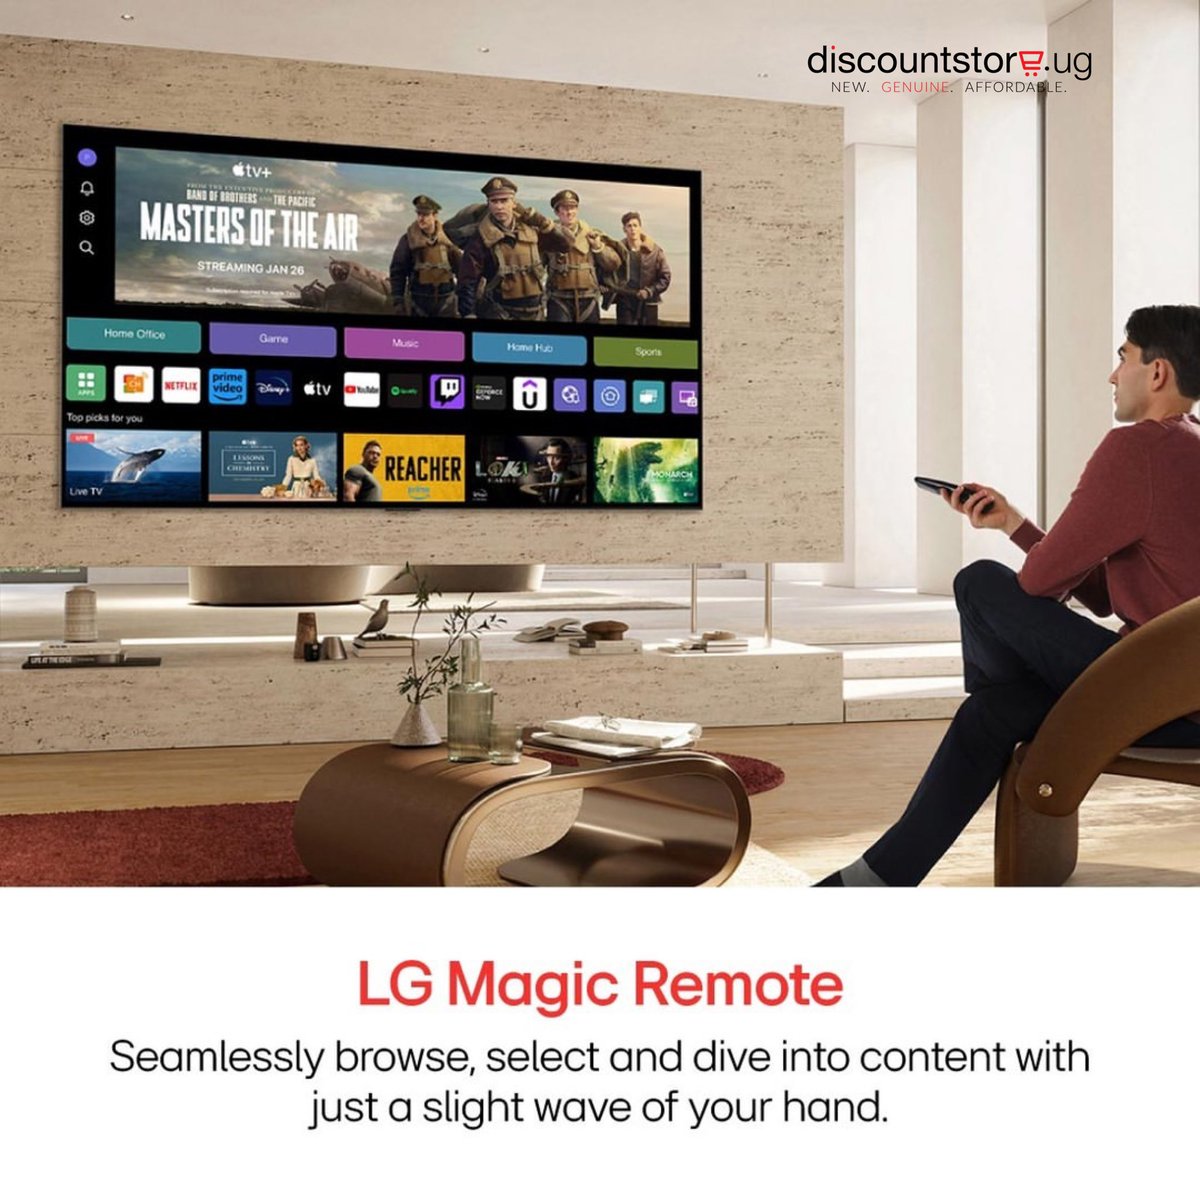 Skip the direction buttons and immediately open your favorite shows with LG Magic Remote
This remote creates a new experience in navigating your LG TV!